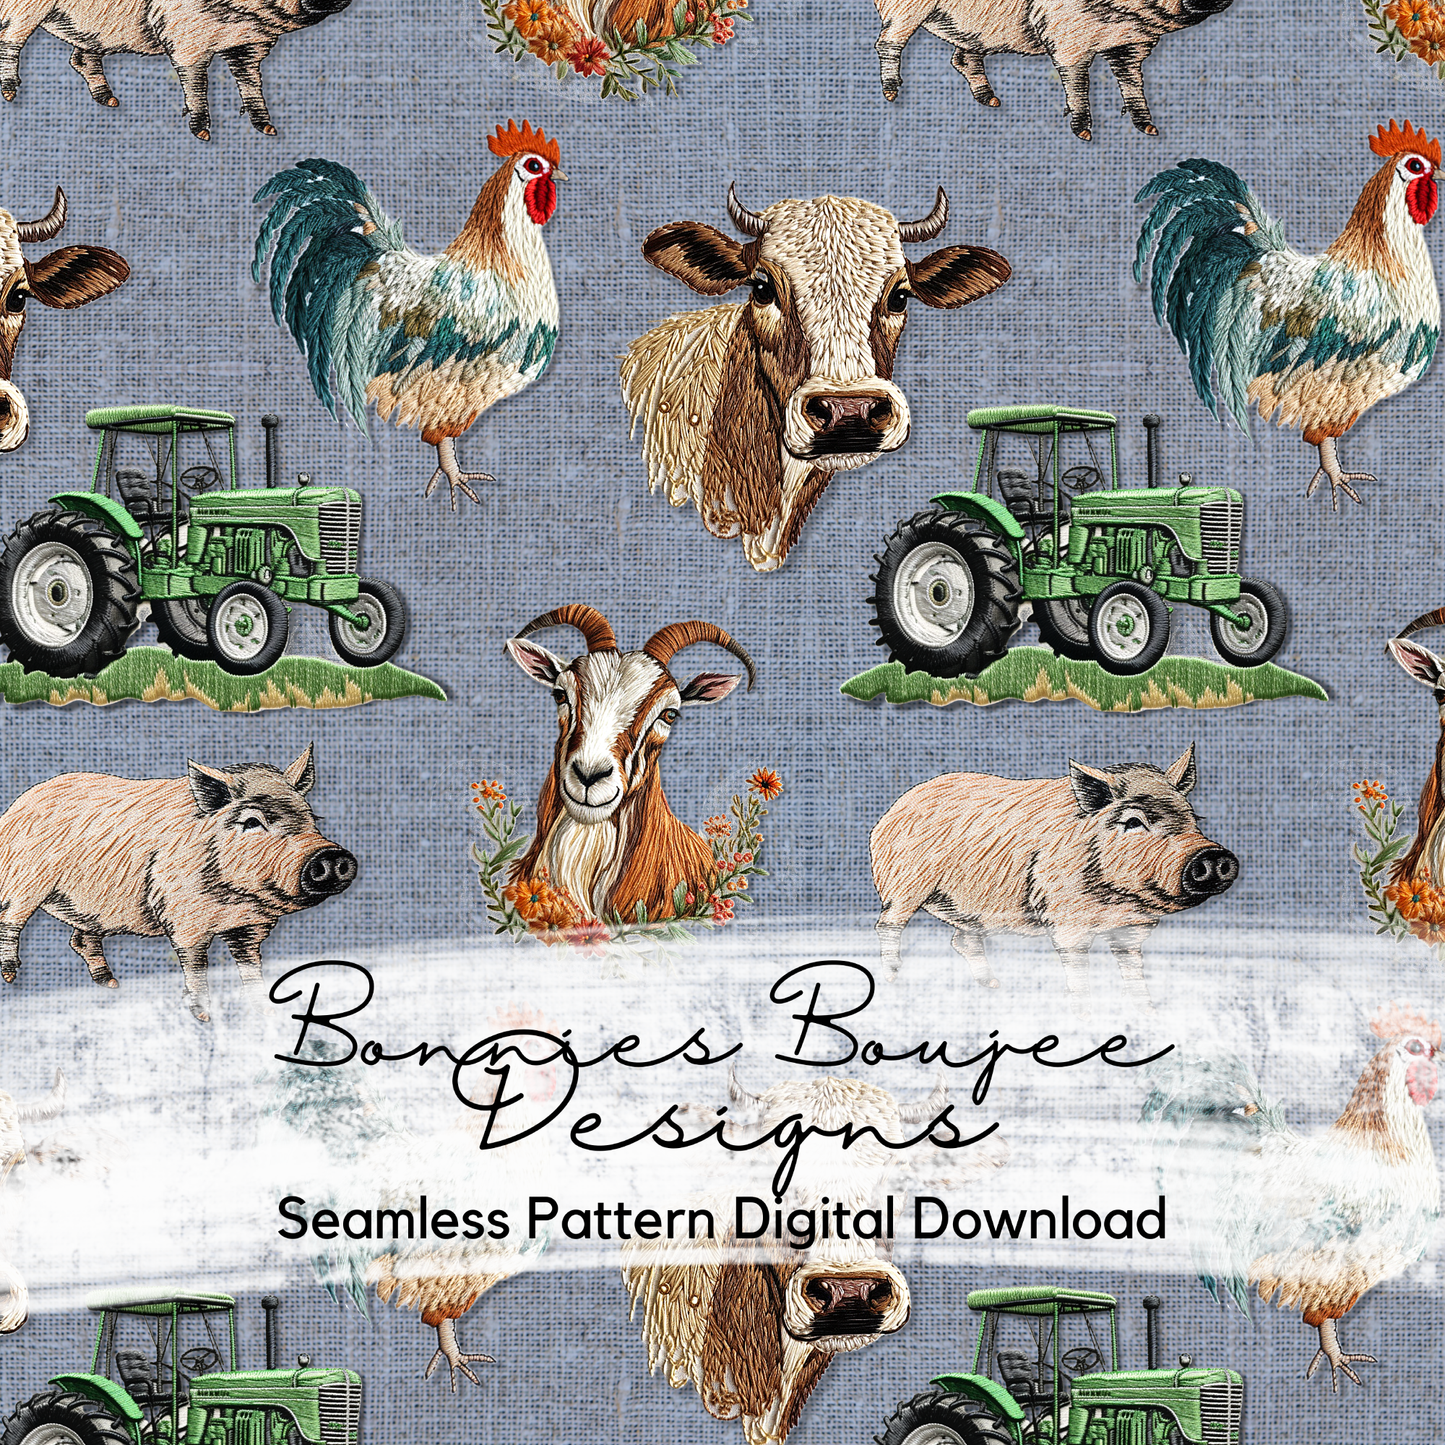 Embroidery of Farm Animals Seamless File